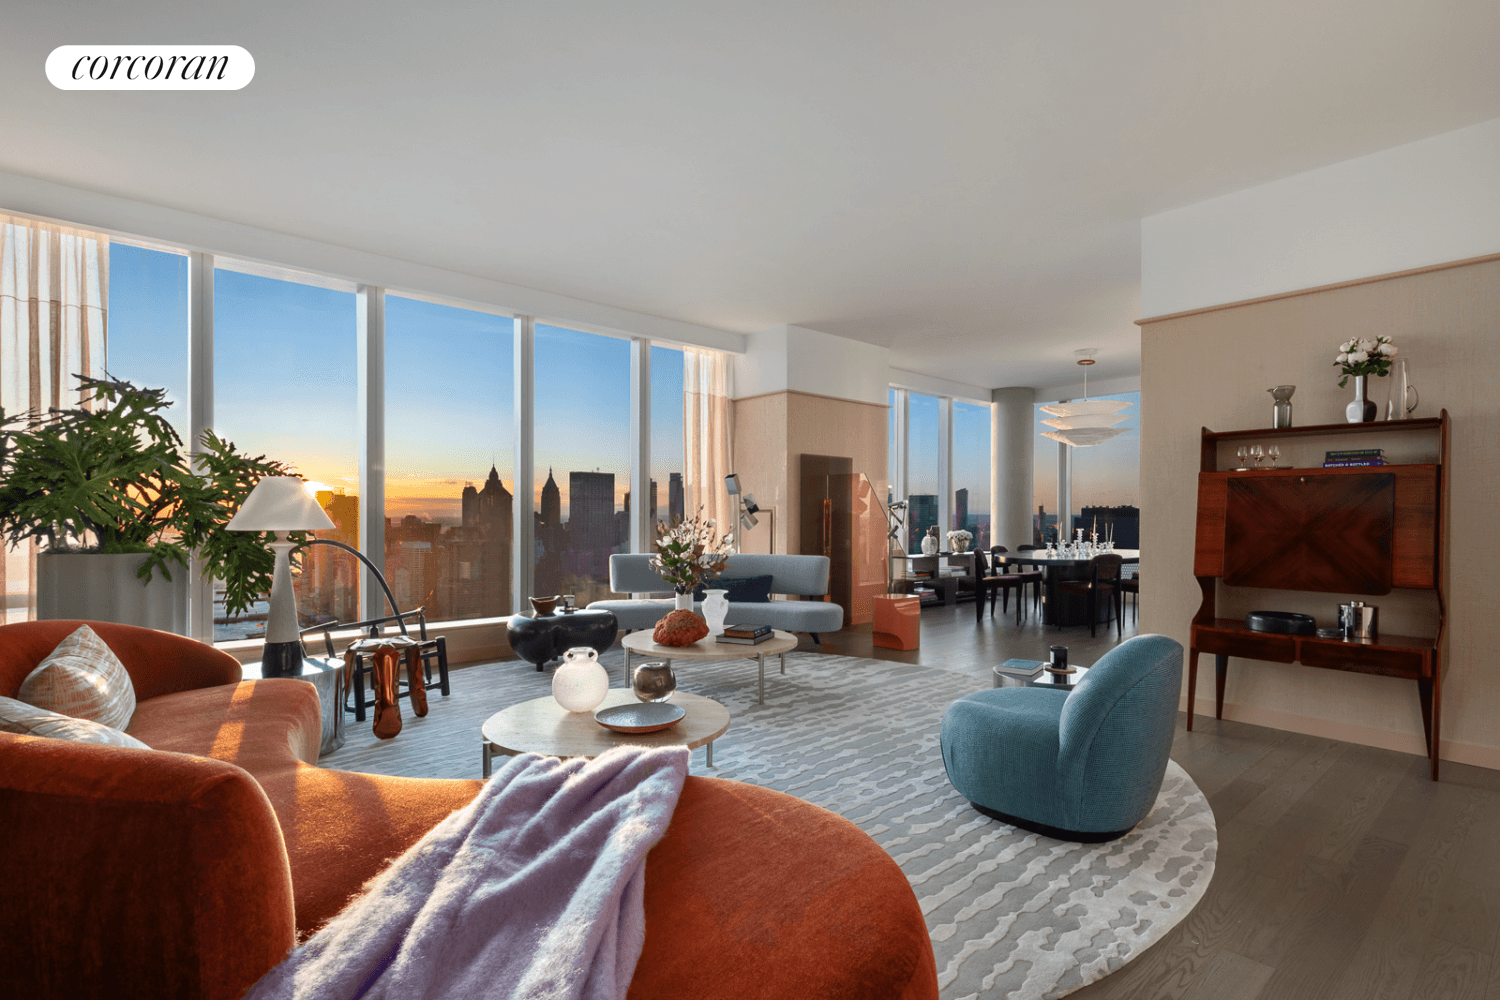 ONE MANHATTAN SQUARE OFFERS ONE OF THE LAST 20 YEAR TAX ABATEMENTS AVAILABLE IN NEW YORK CITYThe Skyscape Collection, featuring Residence 68J, is a home in the sky.